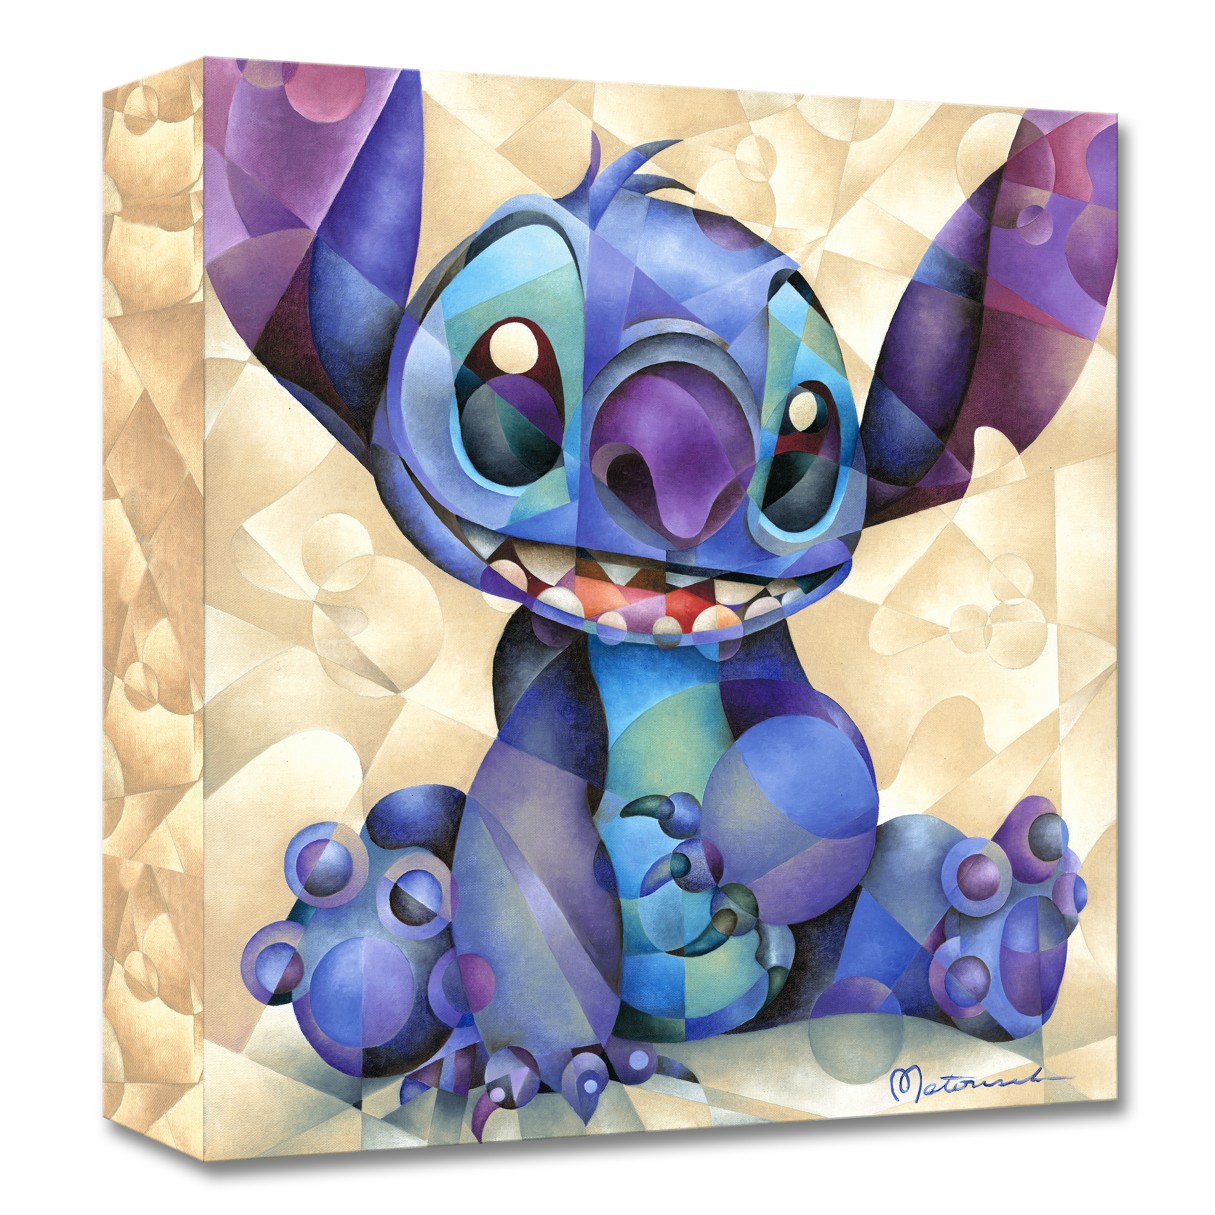 Stitch ''Cute and Fluffy'' Giclée on Canvas by Tom Matousek